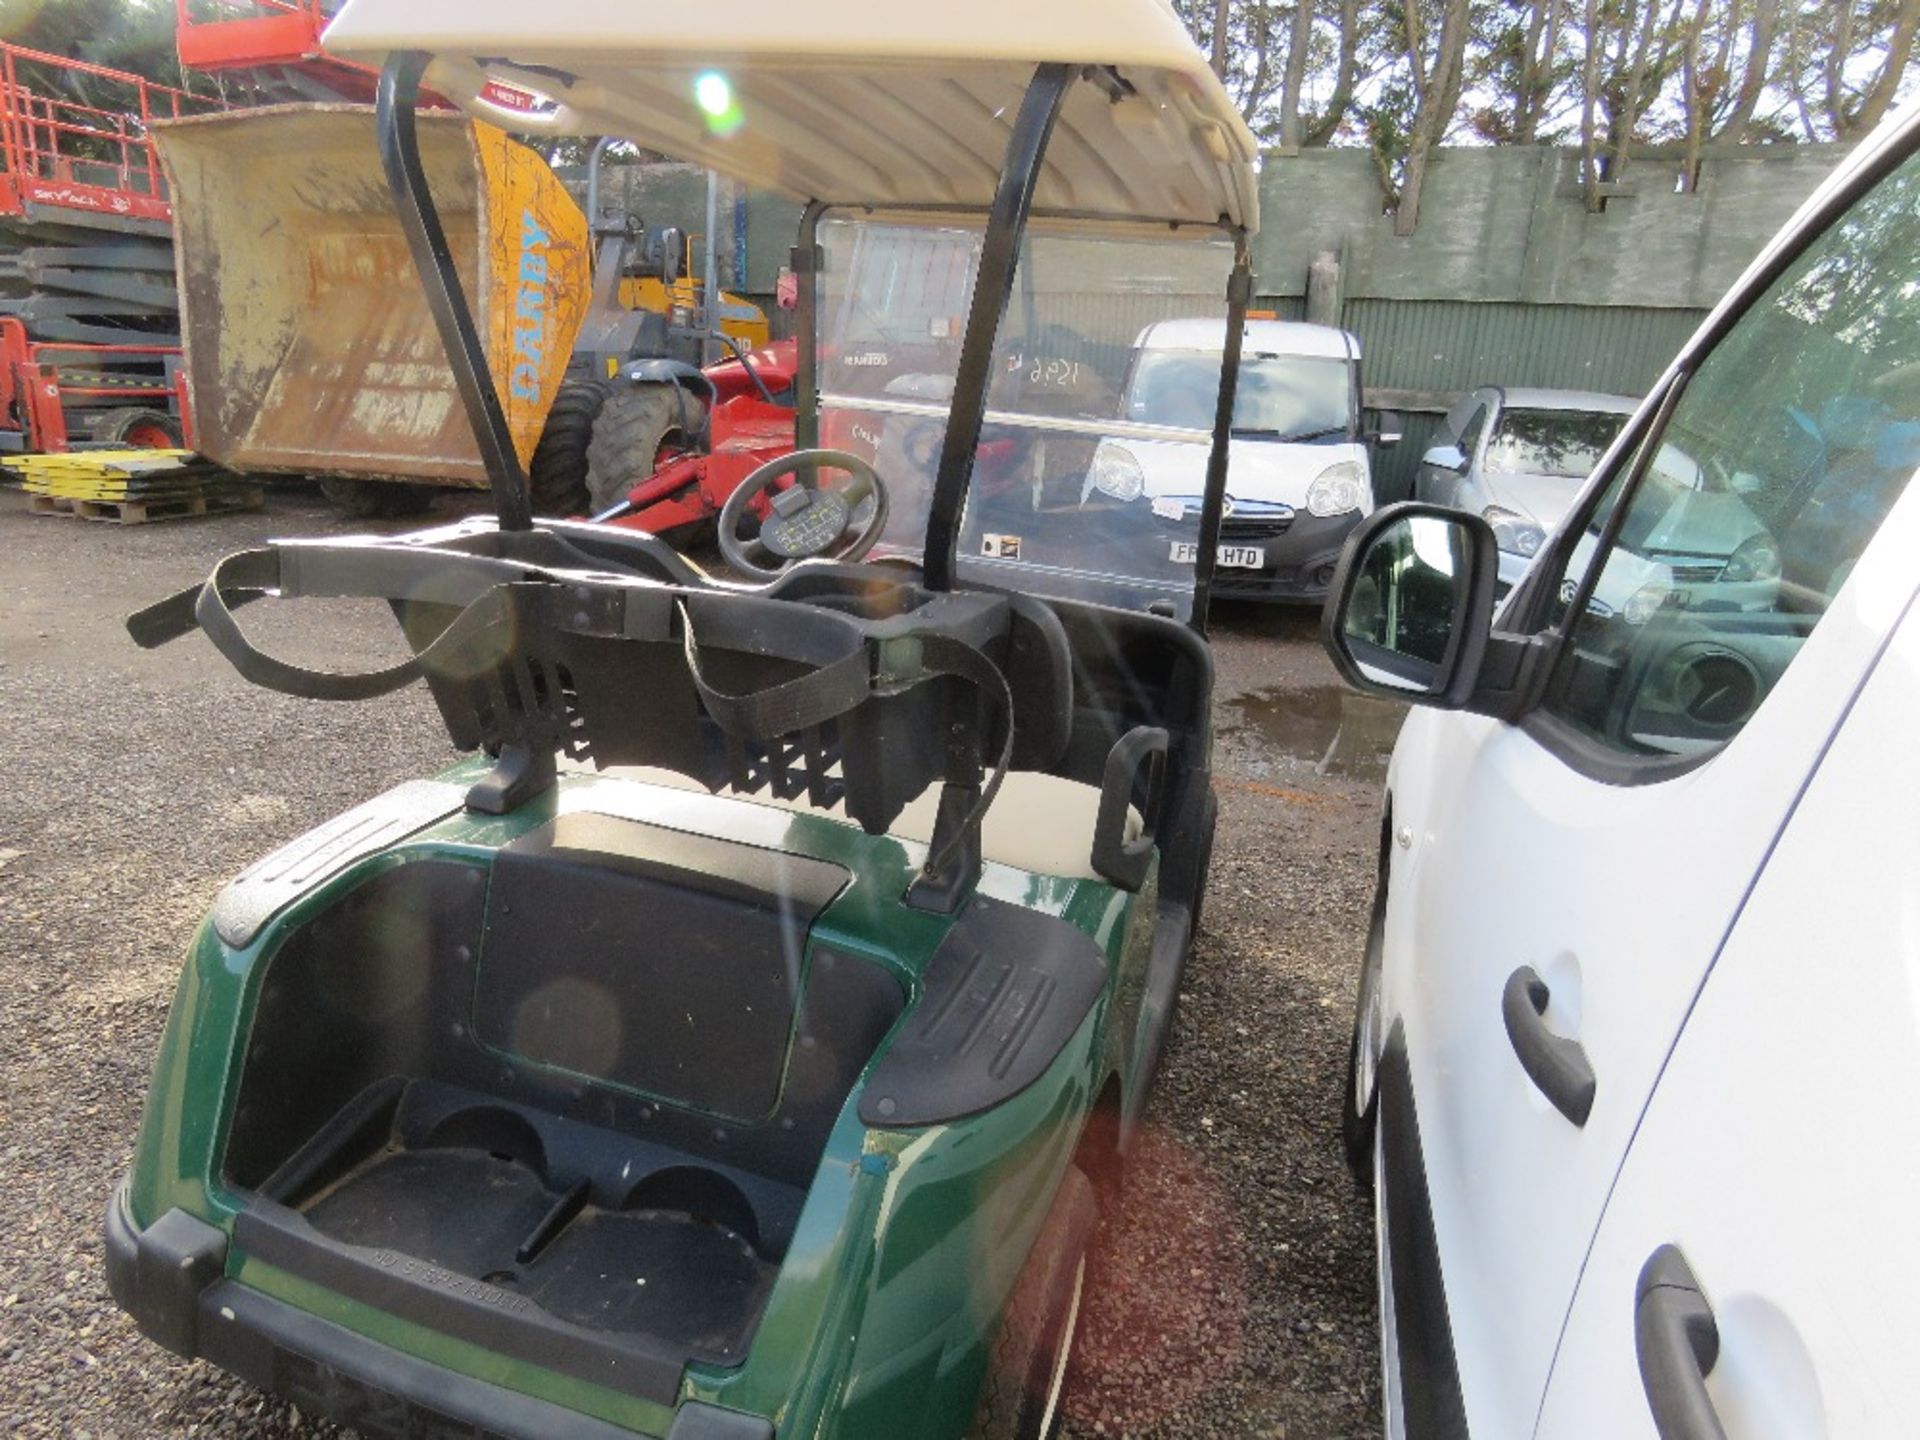 EZGO BATTERY POWERED GOLF BUGGY, YEAR 2013. WHEN TESTED WAS SEEN TO DRIVE, STEER AND BRAKE. WITH KEY - Image 4 of 6